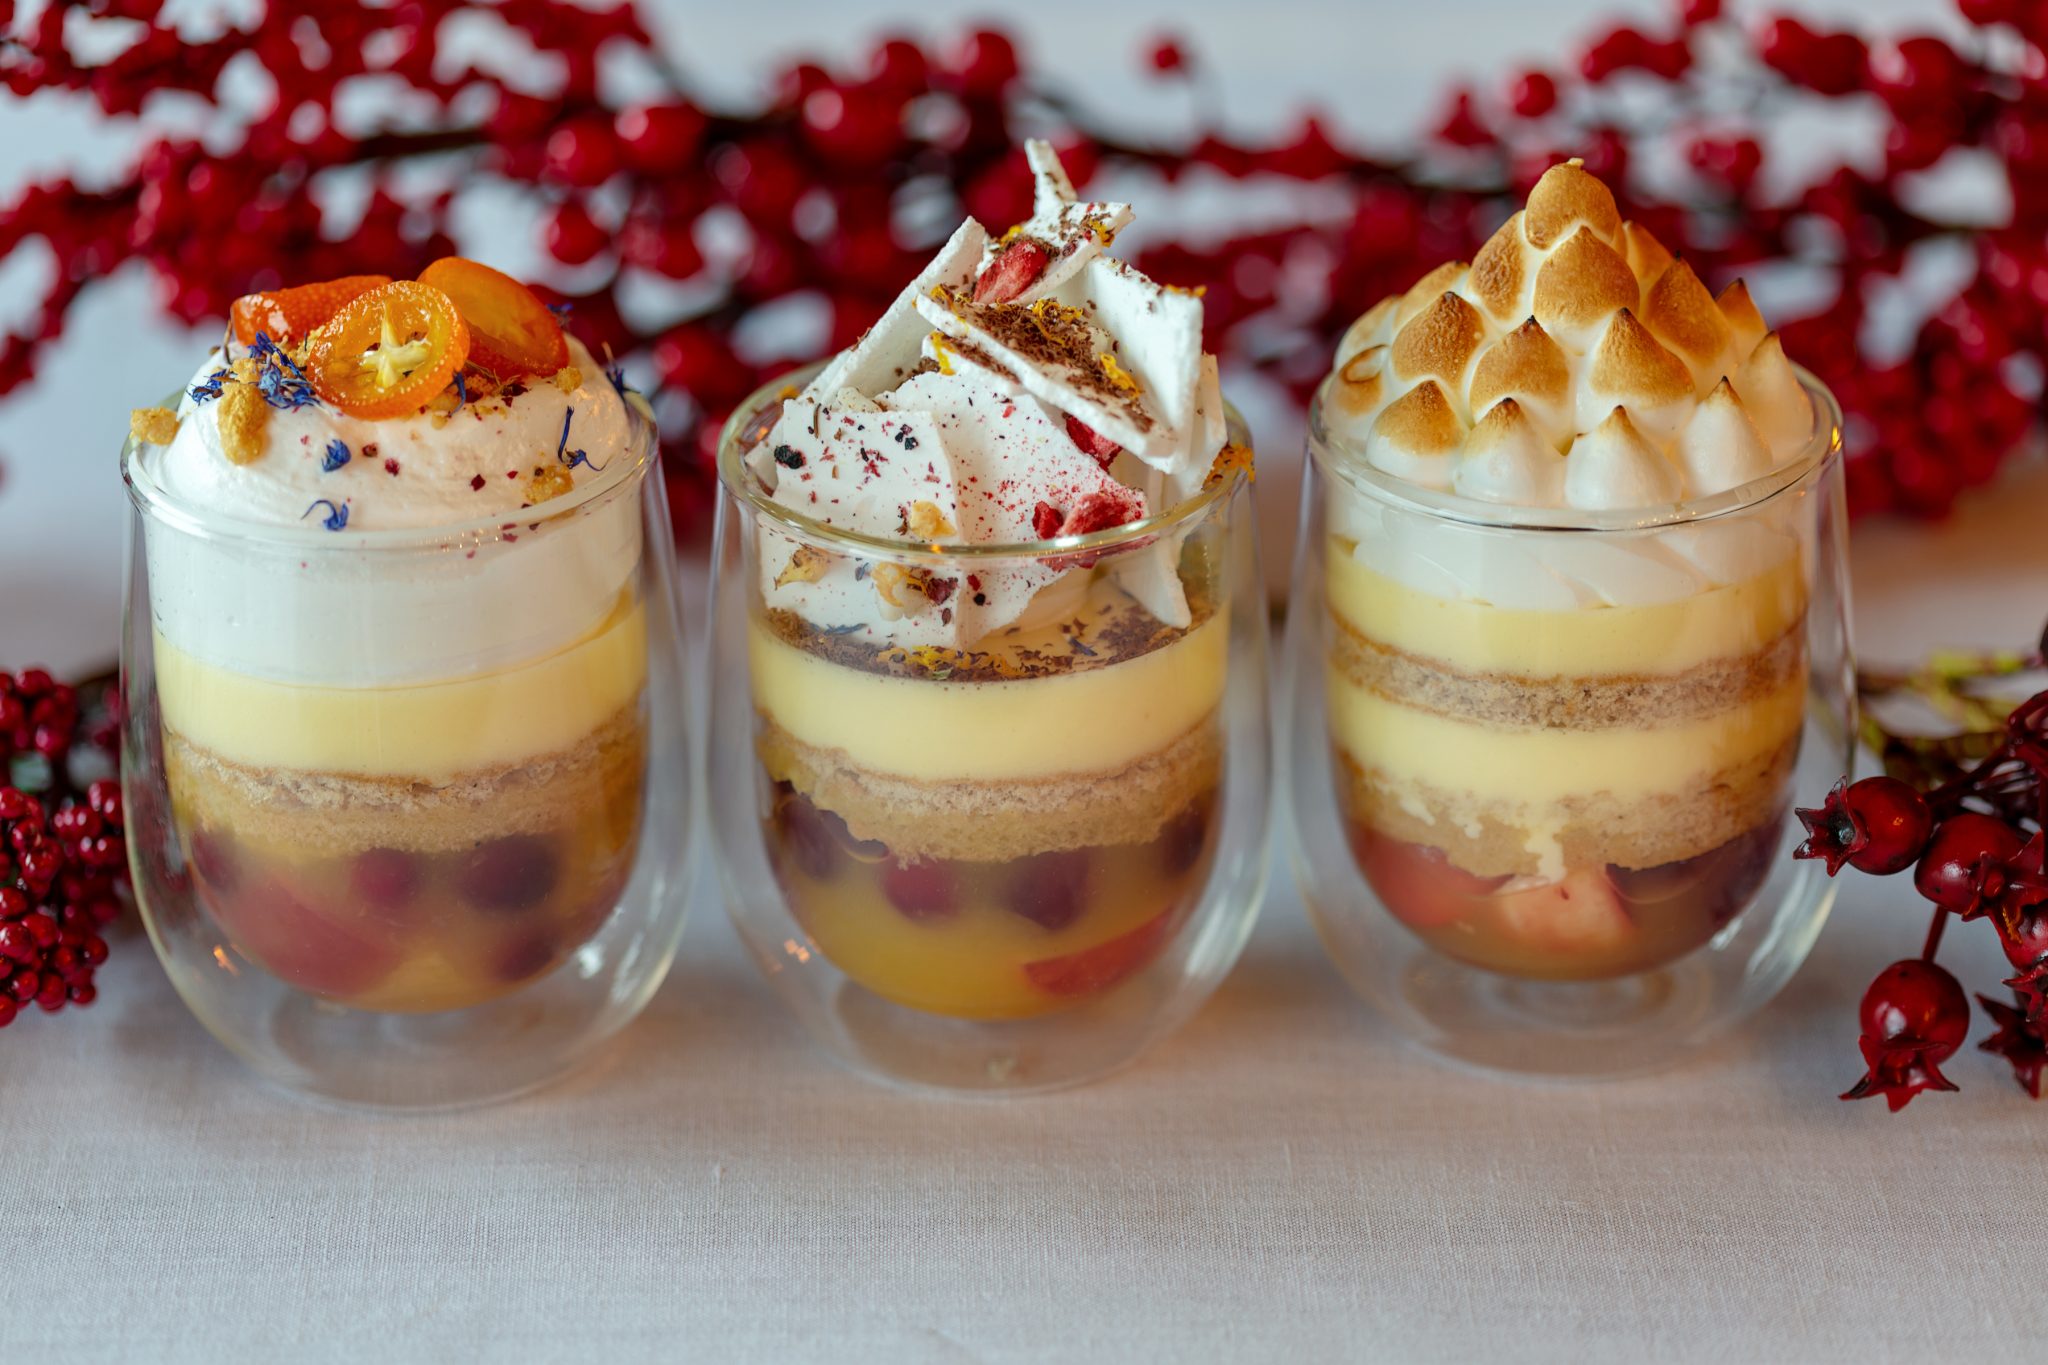 Looking for a Christmas cookery challenge? Try our eggnog trifle recipe